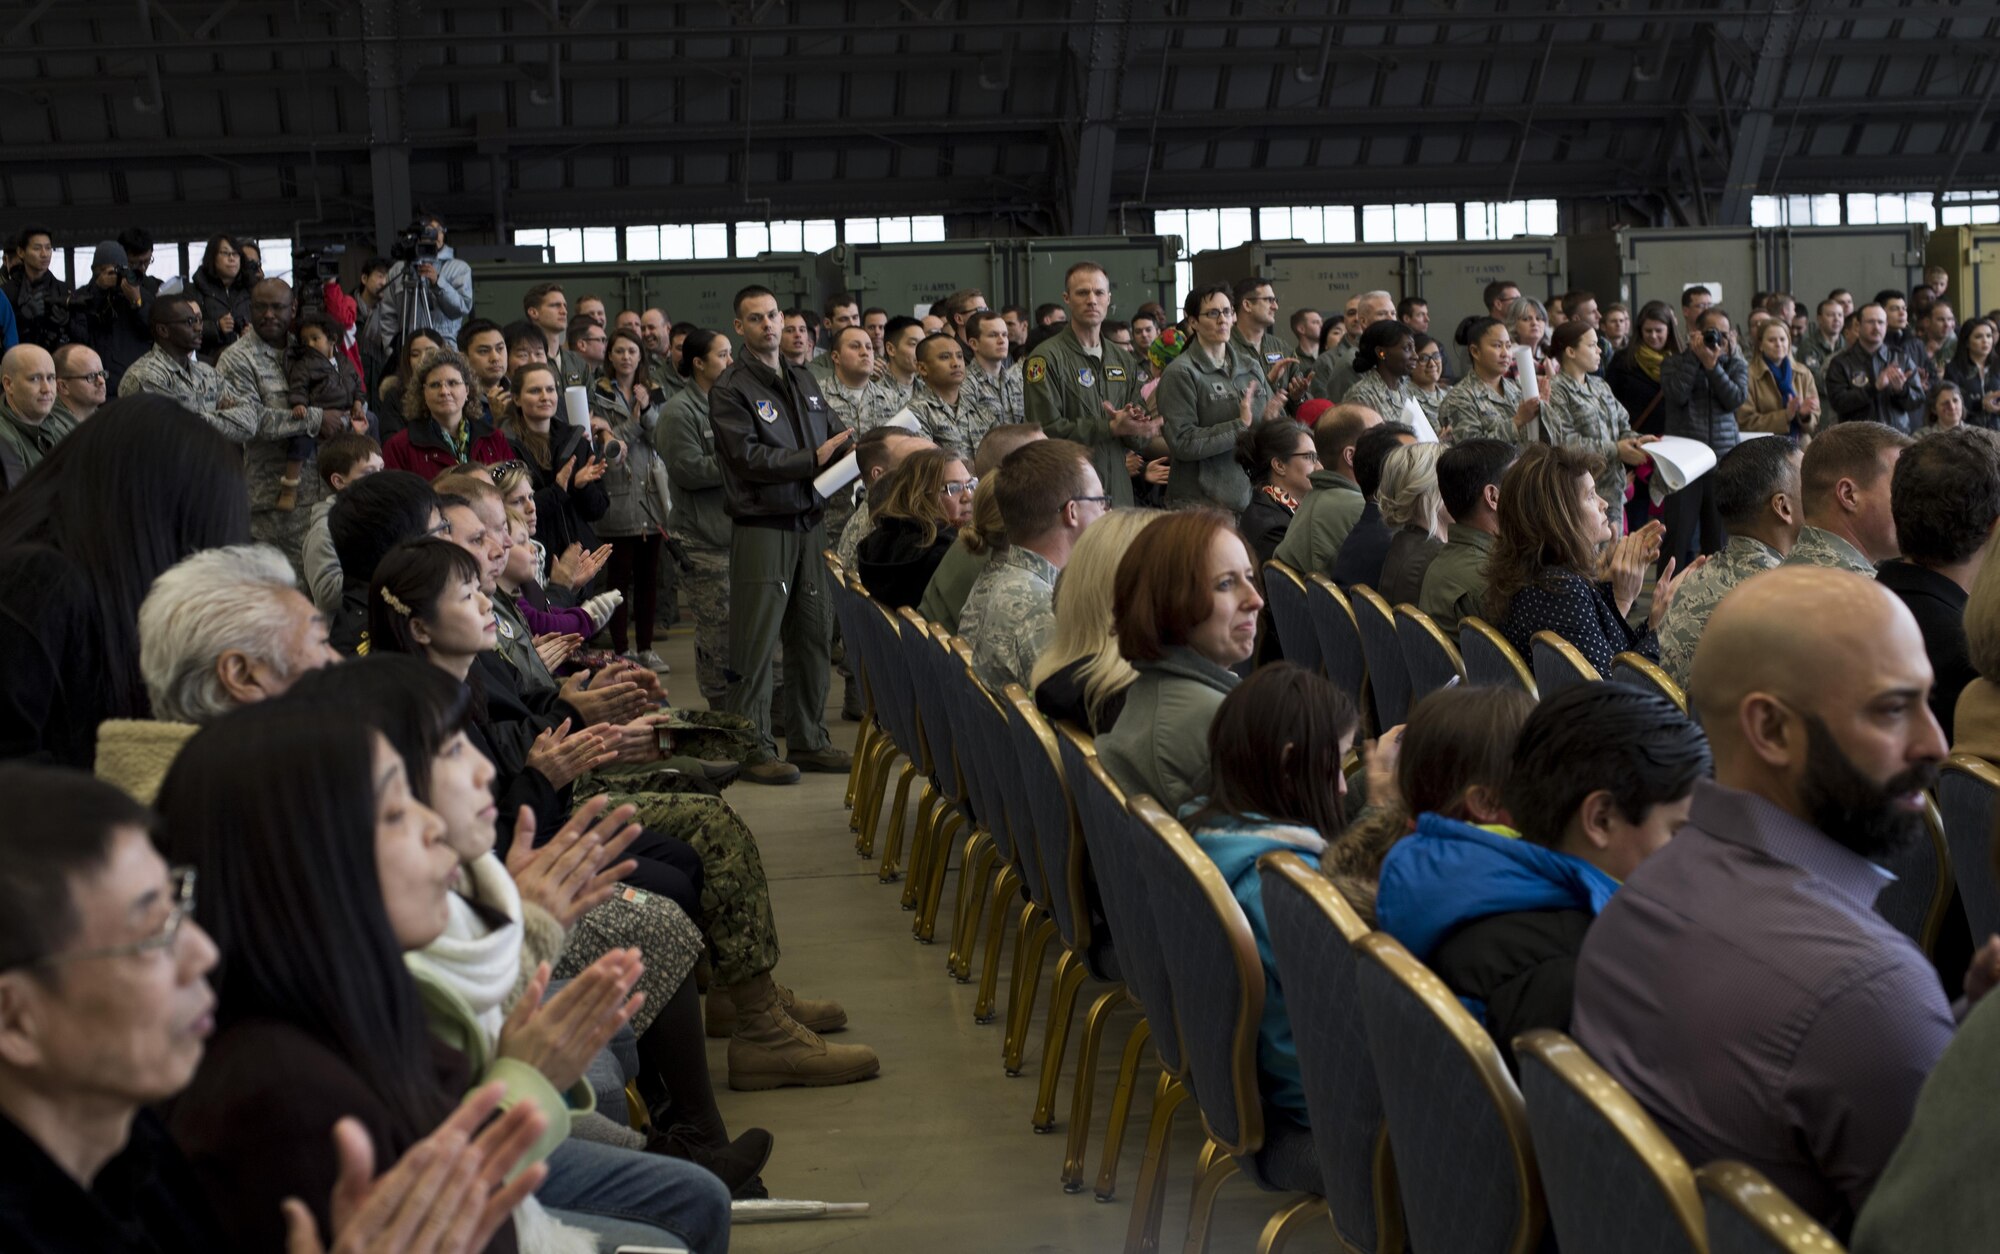 Ceremony attendees clap during a C-130J Super Hercules arrival ceremony at Yokota Air Base, Japan, March 6, 2016. Much like its H-model older brother, the C-130J will be used to support critical peacekeeping and contingency operations in the Indo-Asia Pacific region, including cargo delivery, troop transport, airdrop and aeromedical missions. (U.S. Air Force photo by Staff Sgt. David Owsianka)